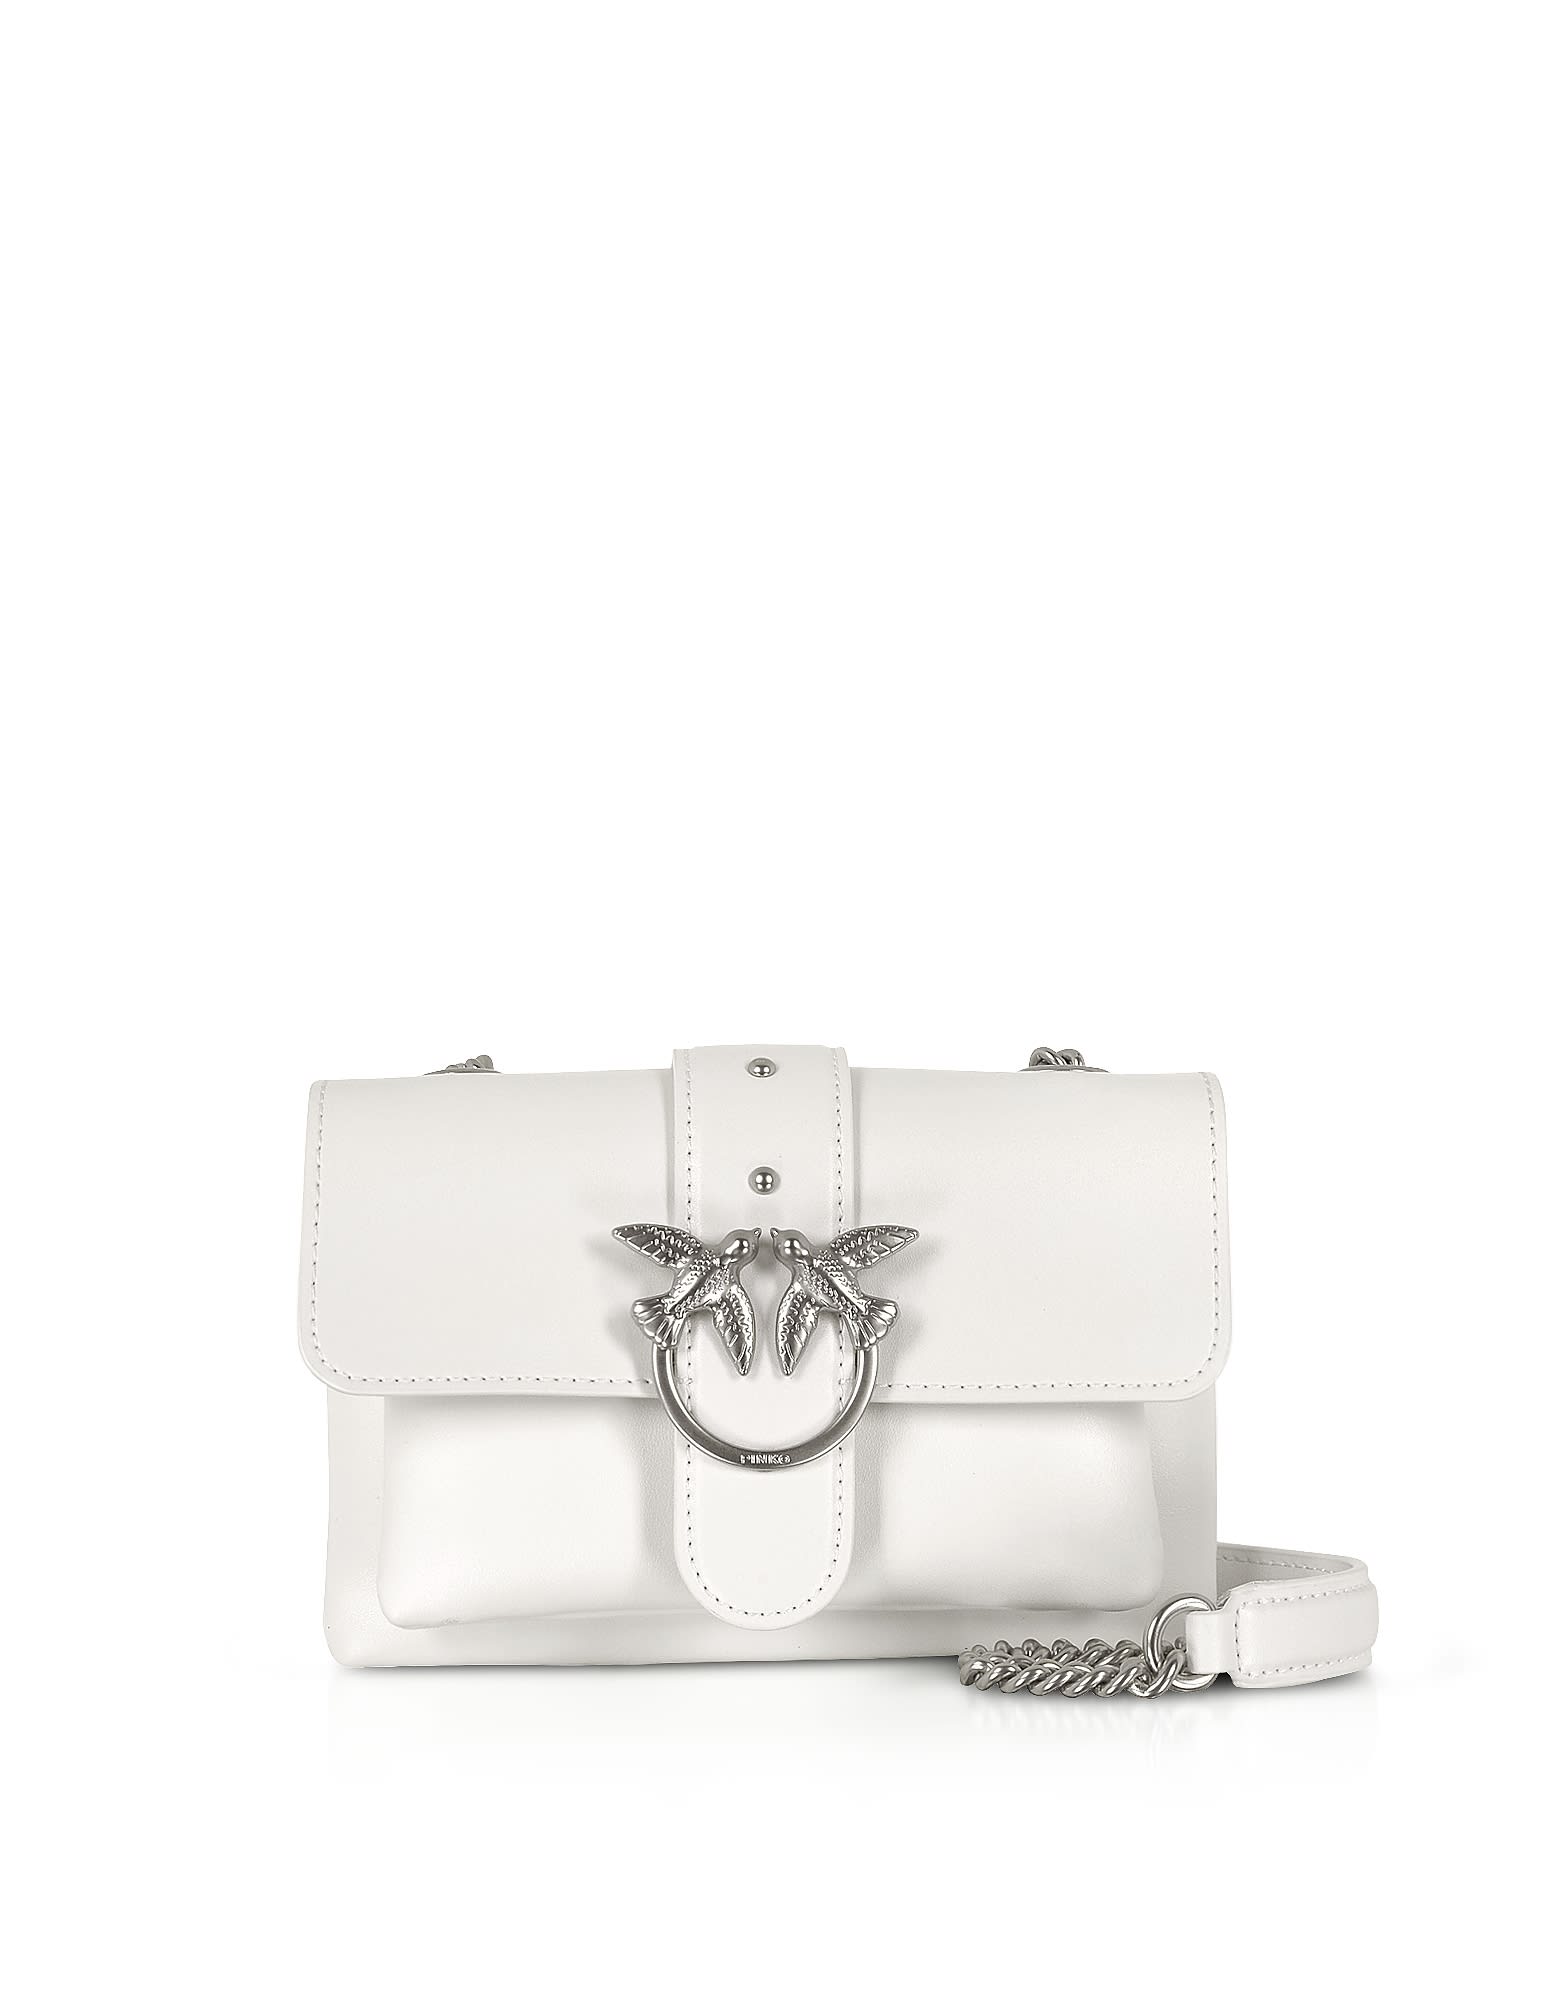 PINKO WHITE LOVE SOFT BABY SIMPLY SHOULDER BAG,11238342